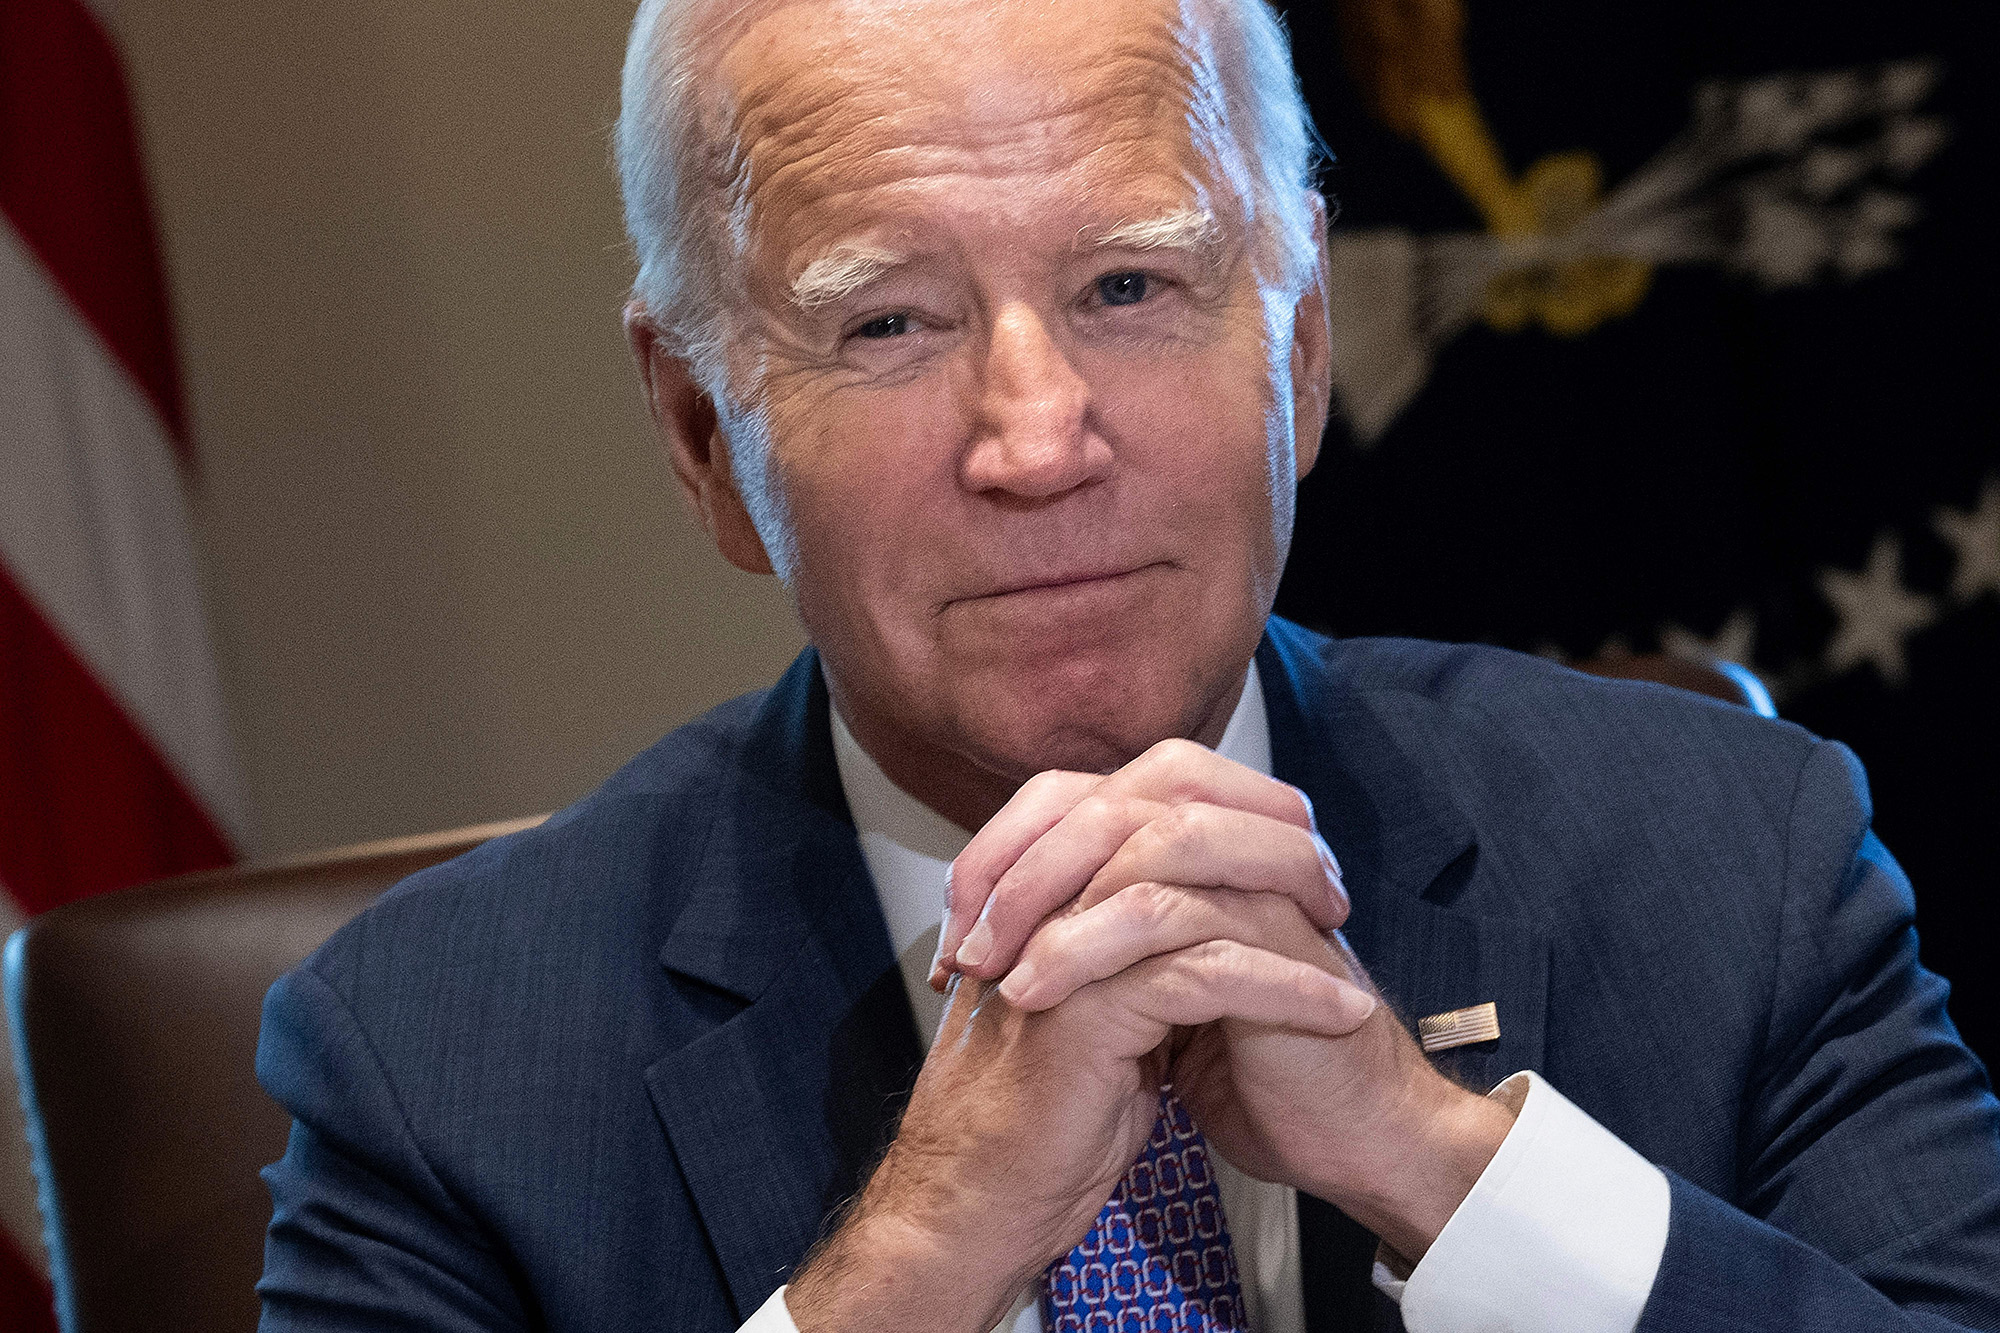 US President Joe Biden looks on during a meeting with his Cabinet in the Cabinet Room of the White House in Washington, DC, on October 2.